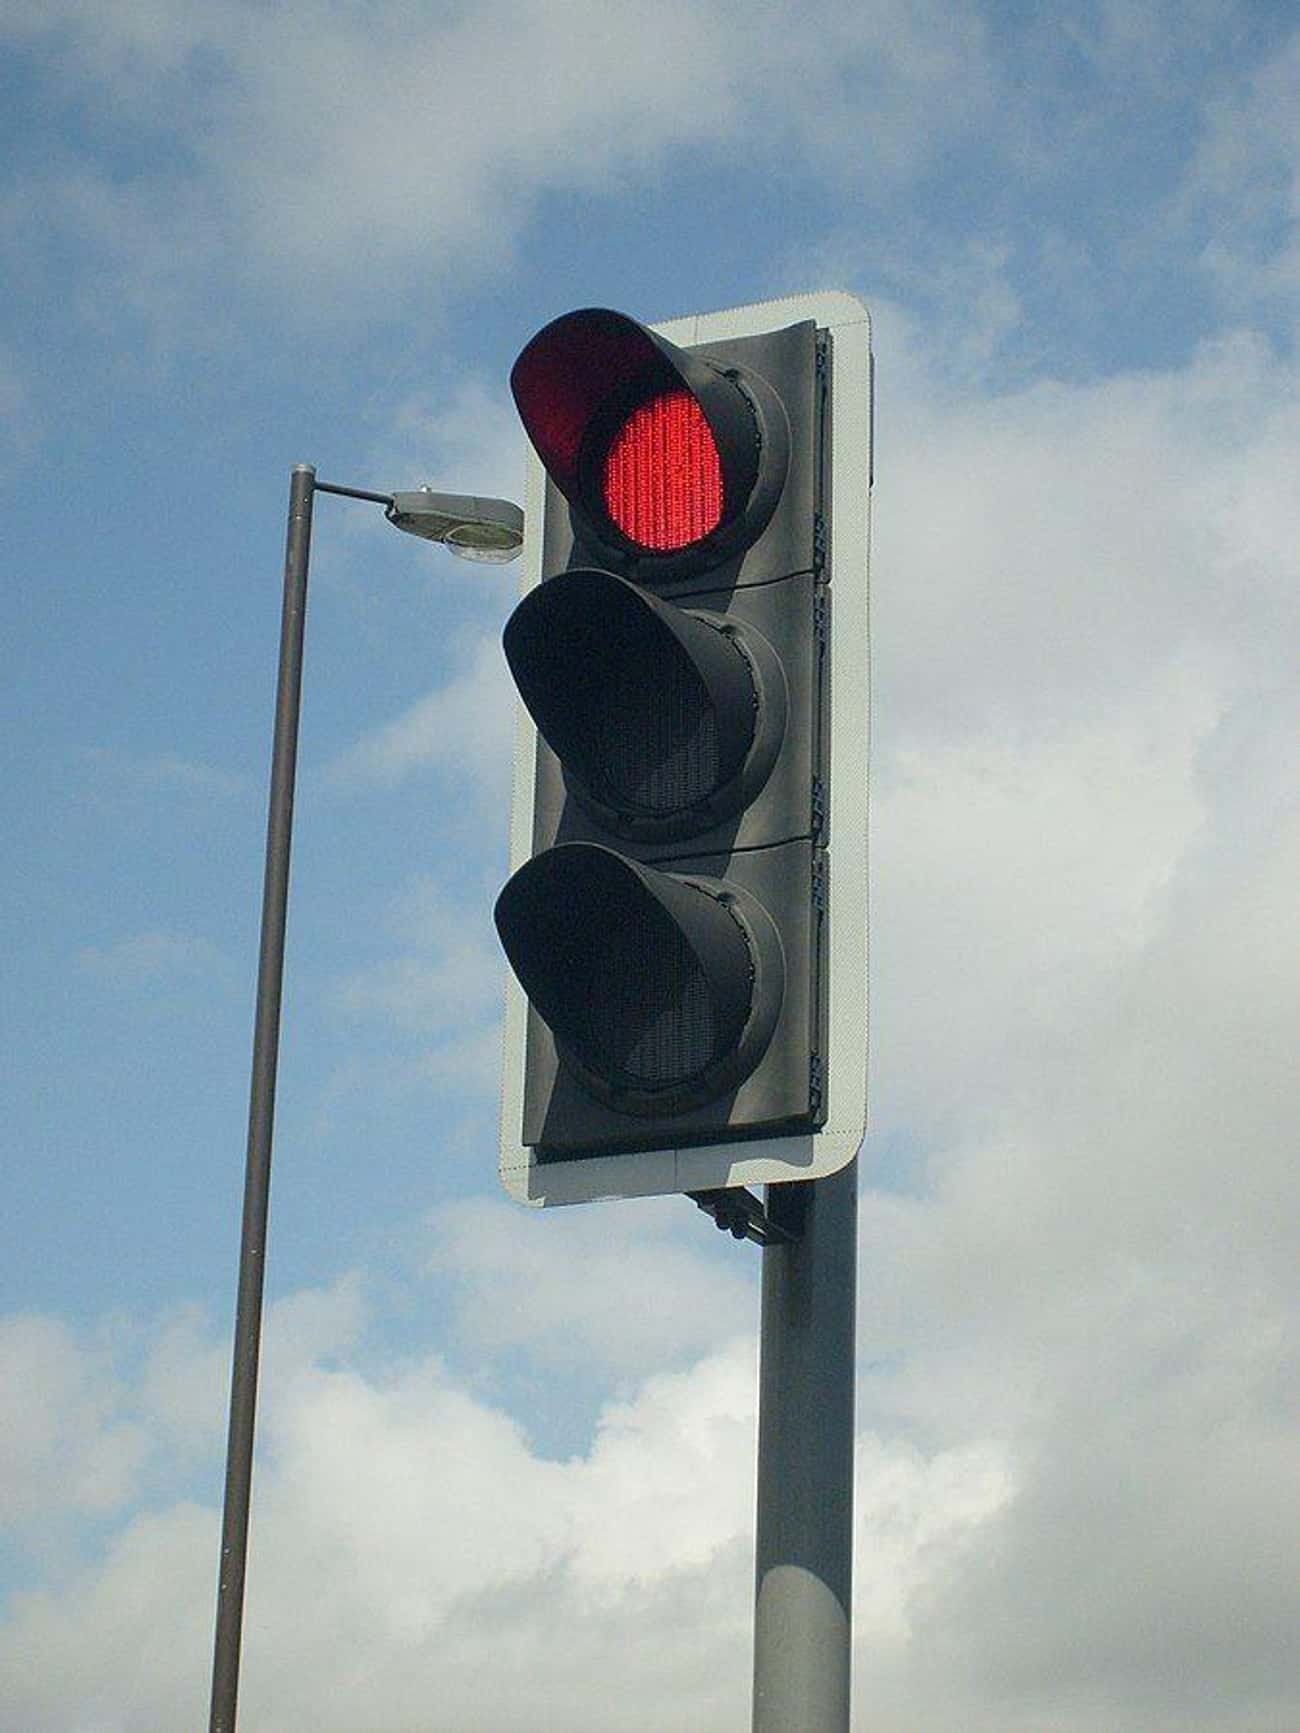 A Red Light Means 'Stop' Because It's The Color That Can Be Seen The Farthest Away